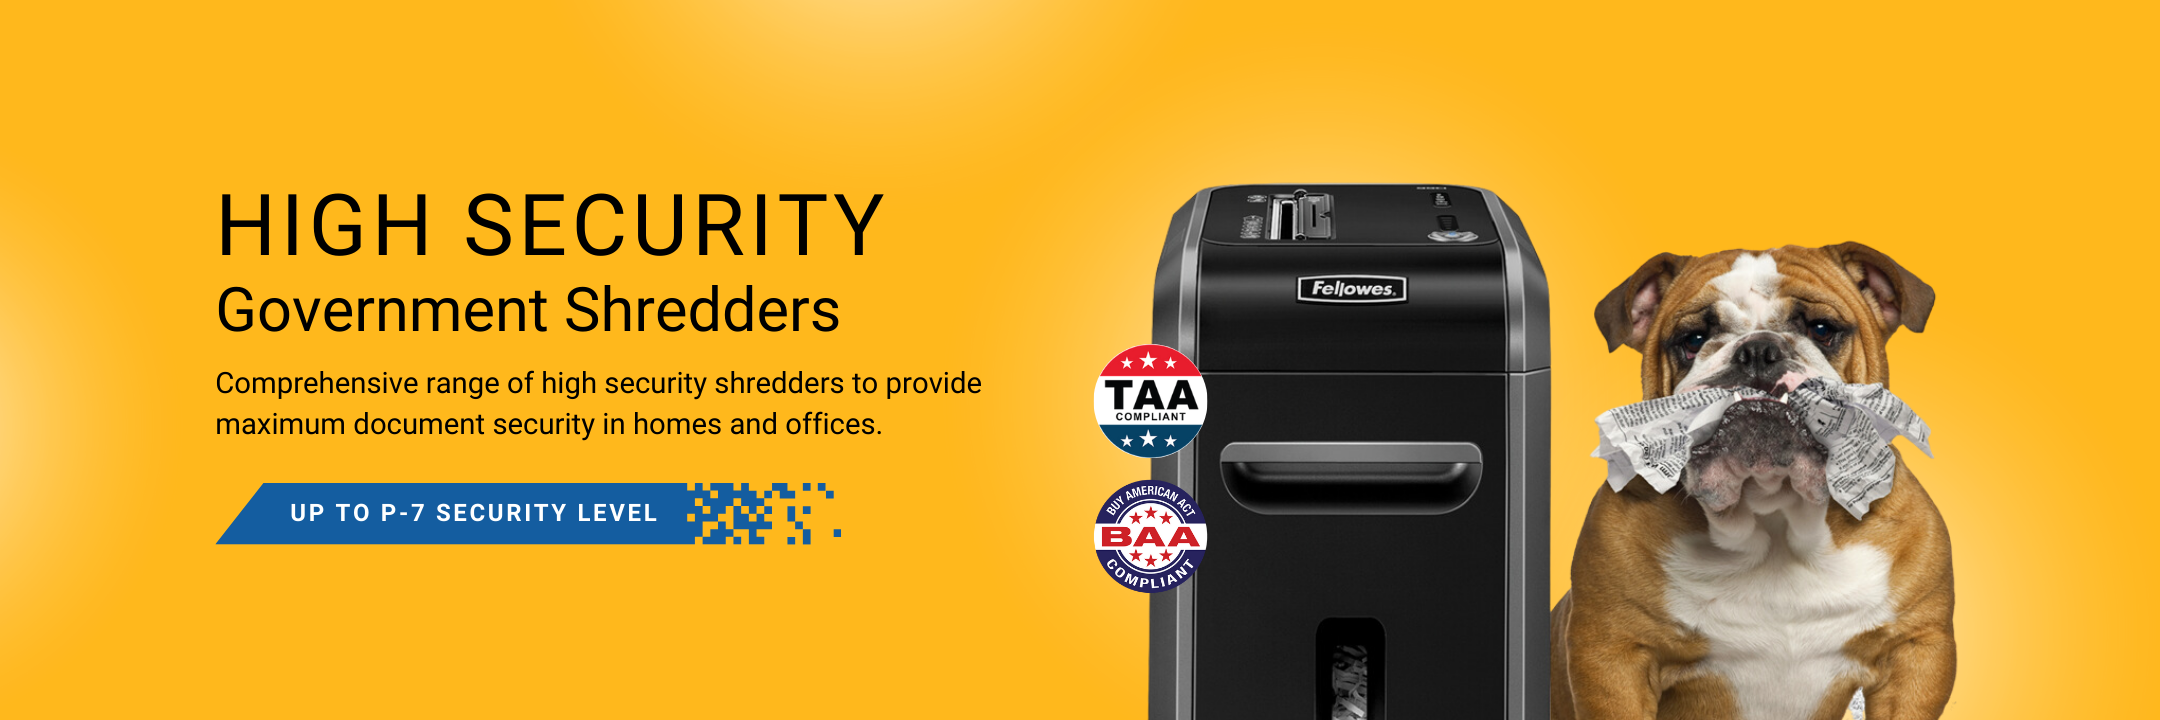 Fellowes-High-Security-Government-Shredders-USA